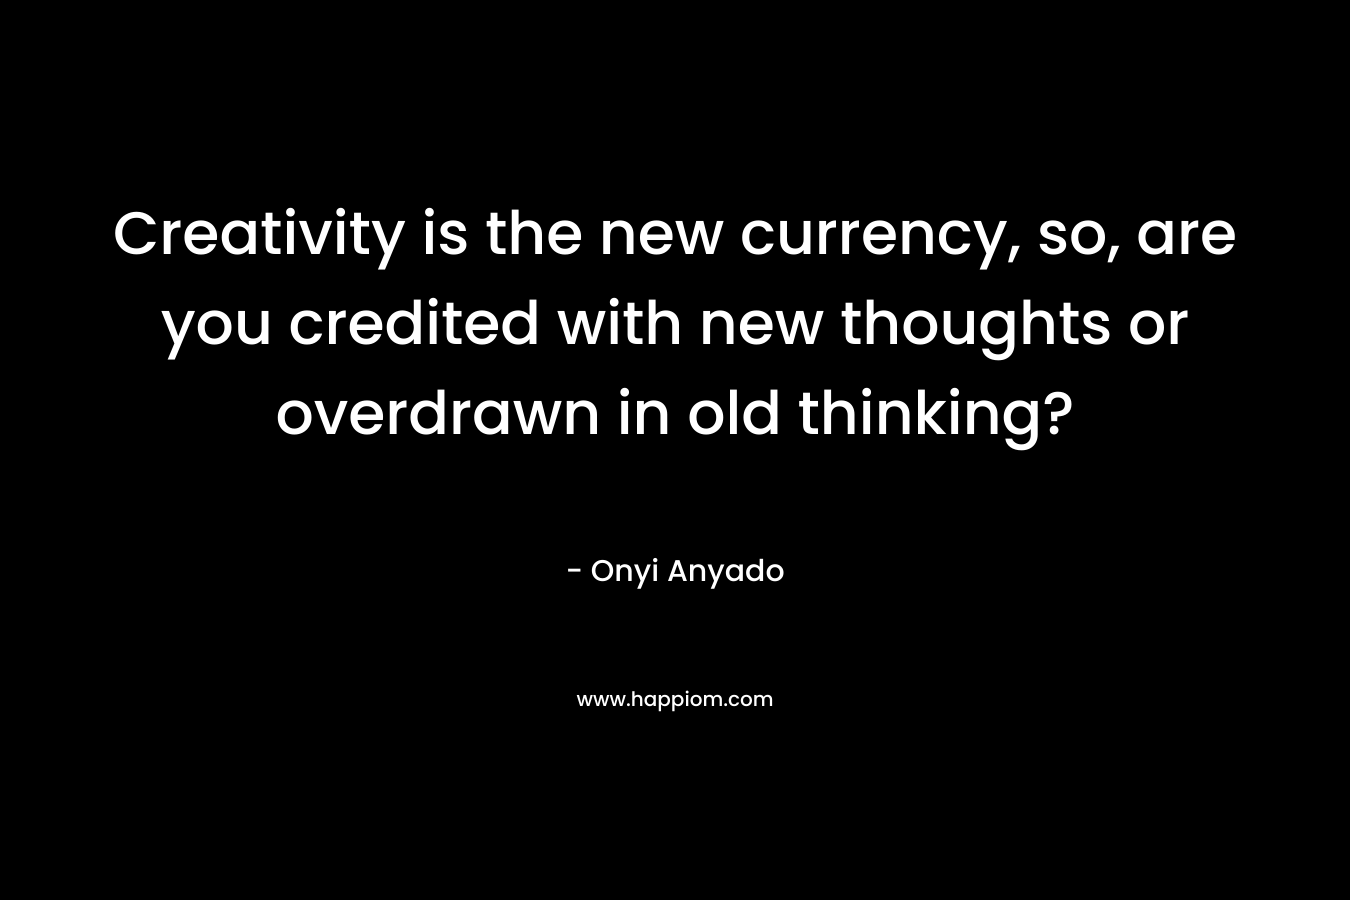 Creativity is the new currency, so, are you credited with new thoughts or overdrawn in old thinking?